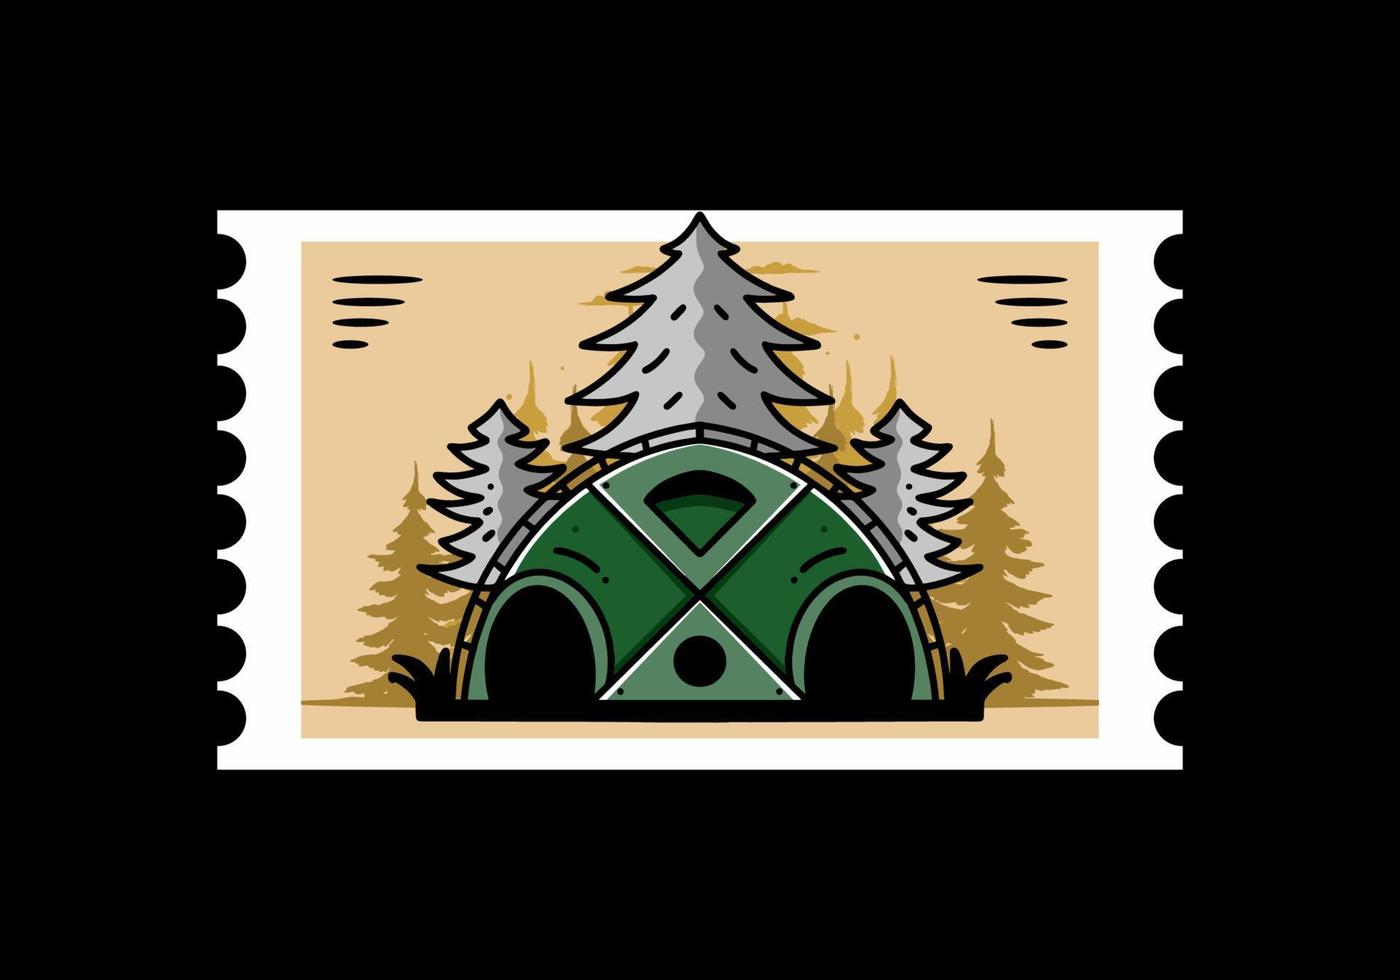 Big family tent and pine trees illustration badge design vector